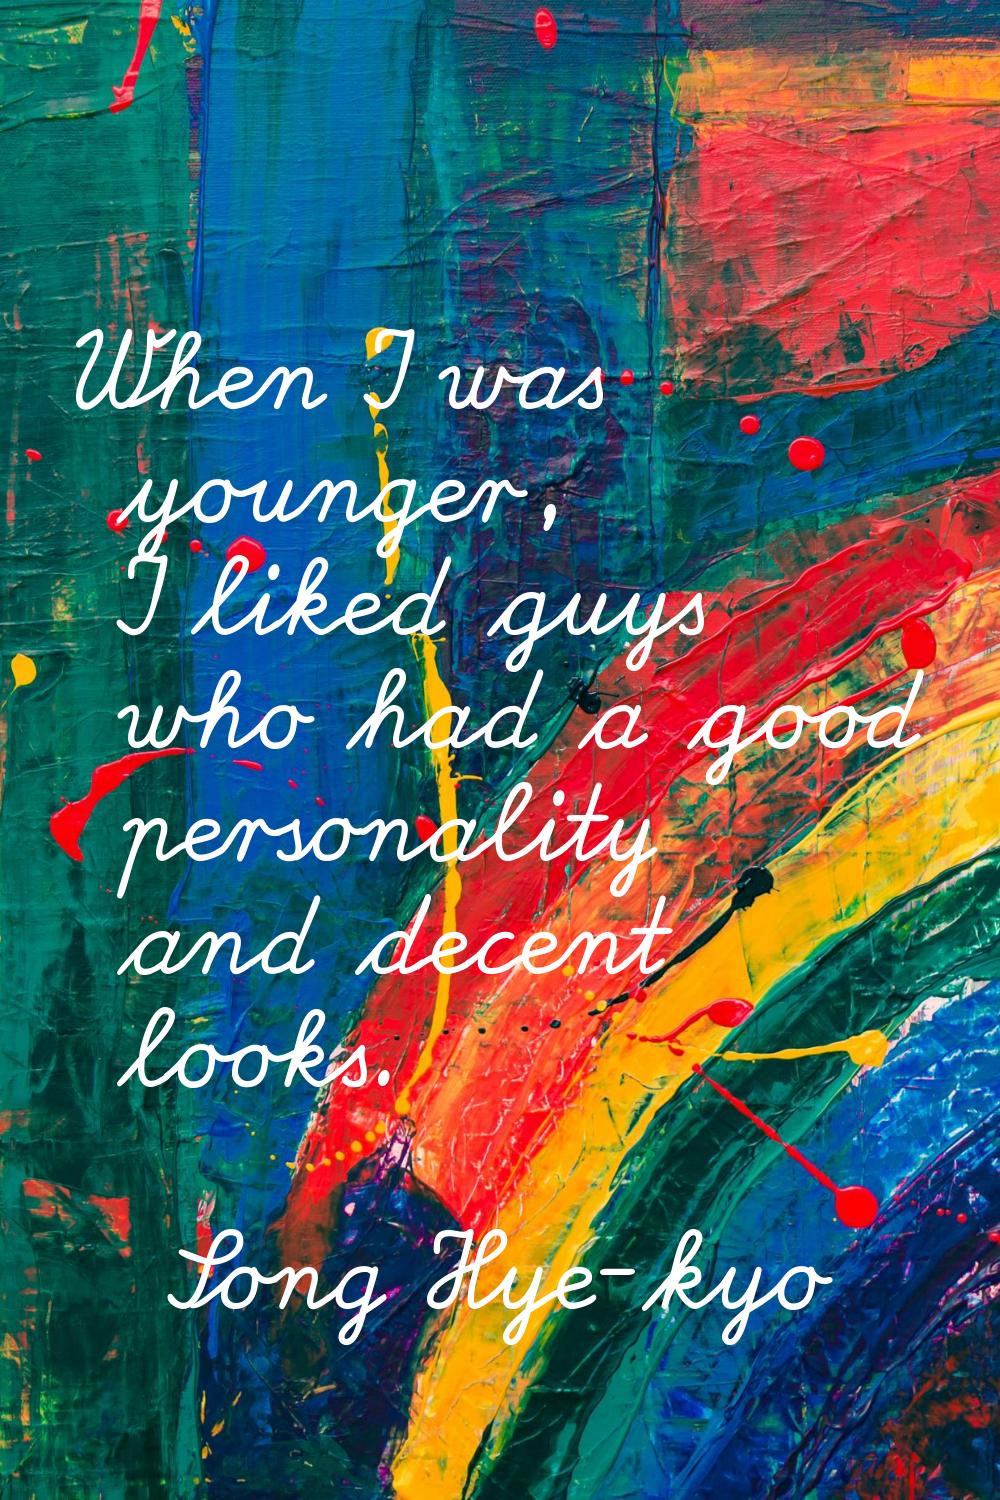 When I was younger, I liked guys who had a good personality and decent looks.